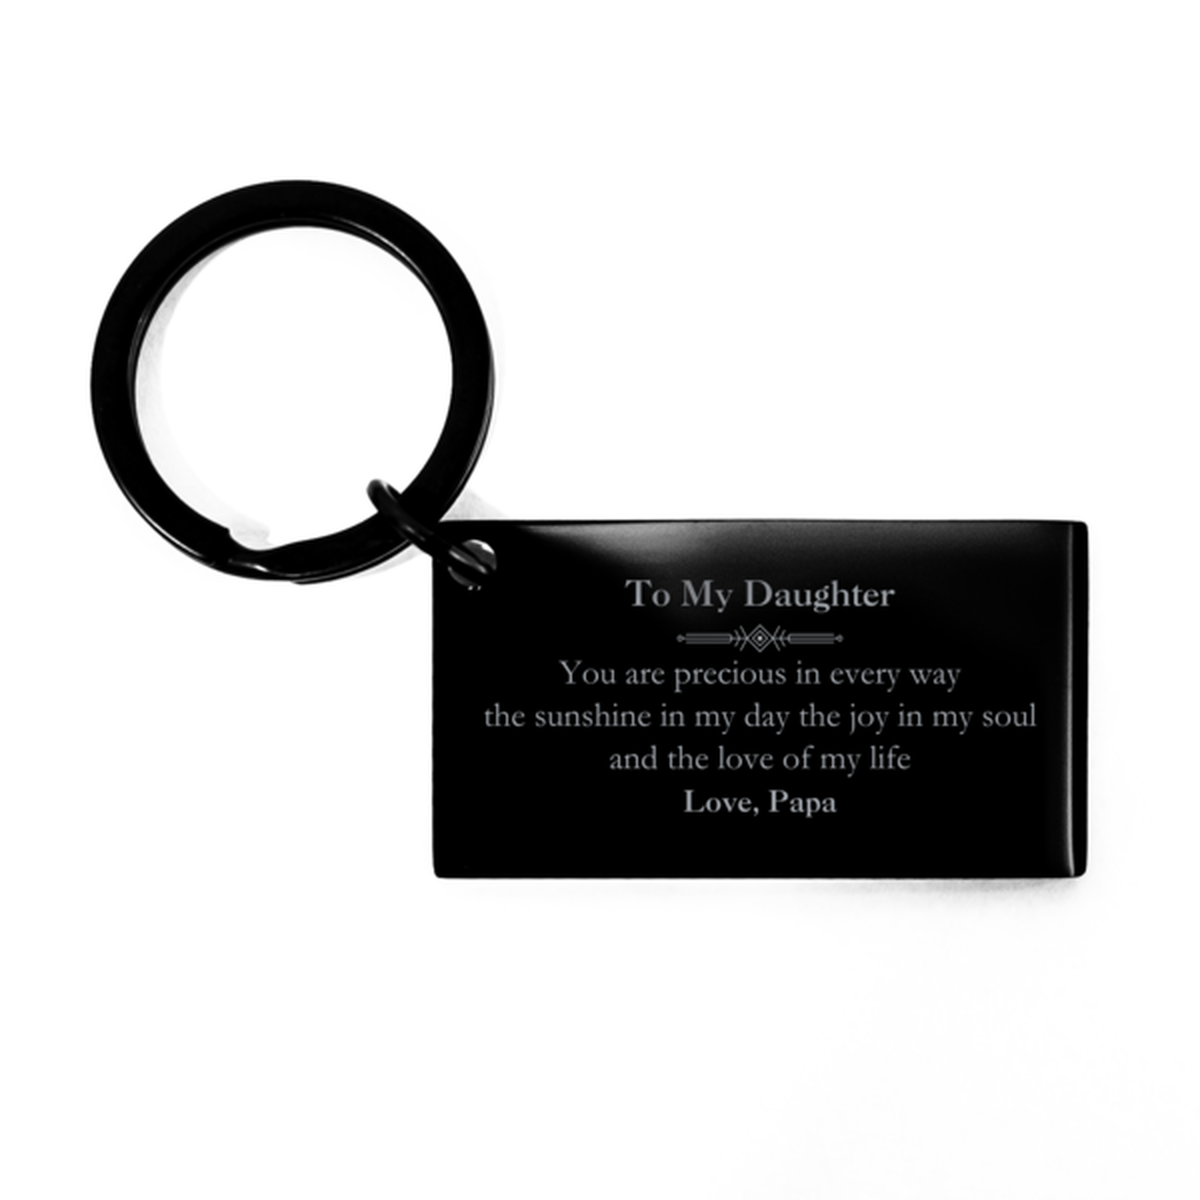 Graduation Gifts for Daughter Keychain Present from Papa, Christmas Daughter Birthday Gifts Daughter You are precious in every way the sunshine in my day. Love, Papa